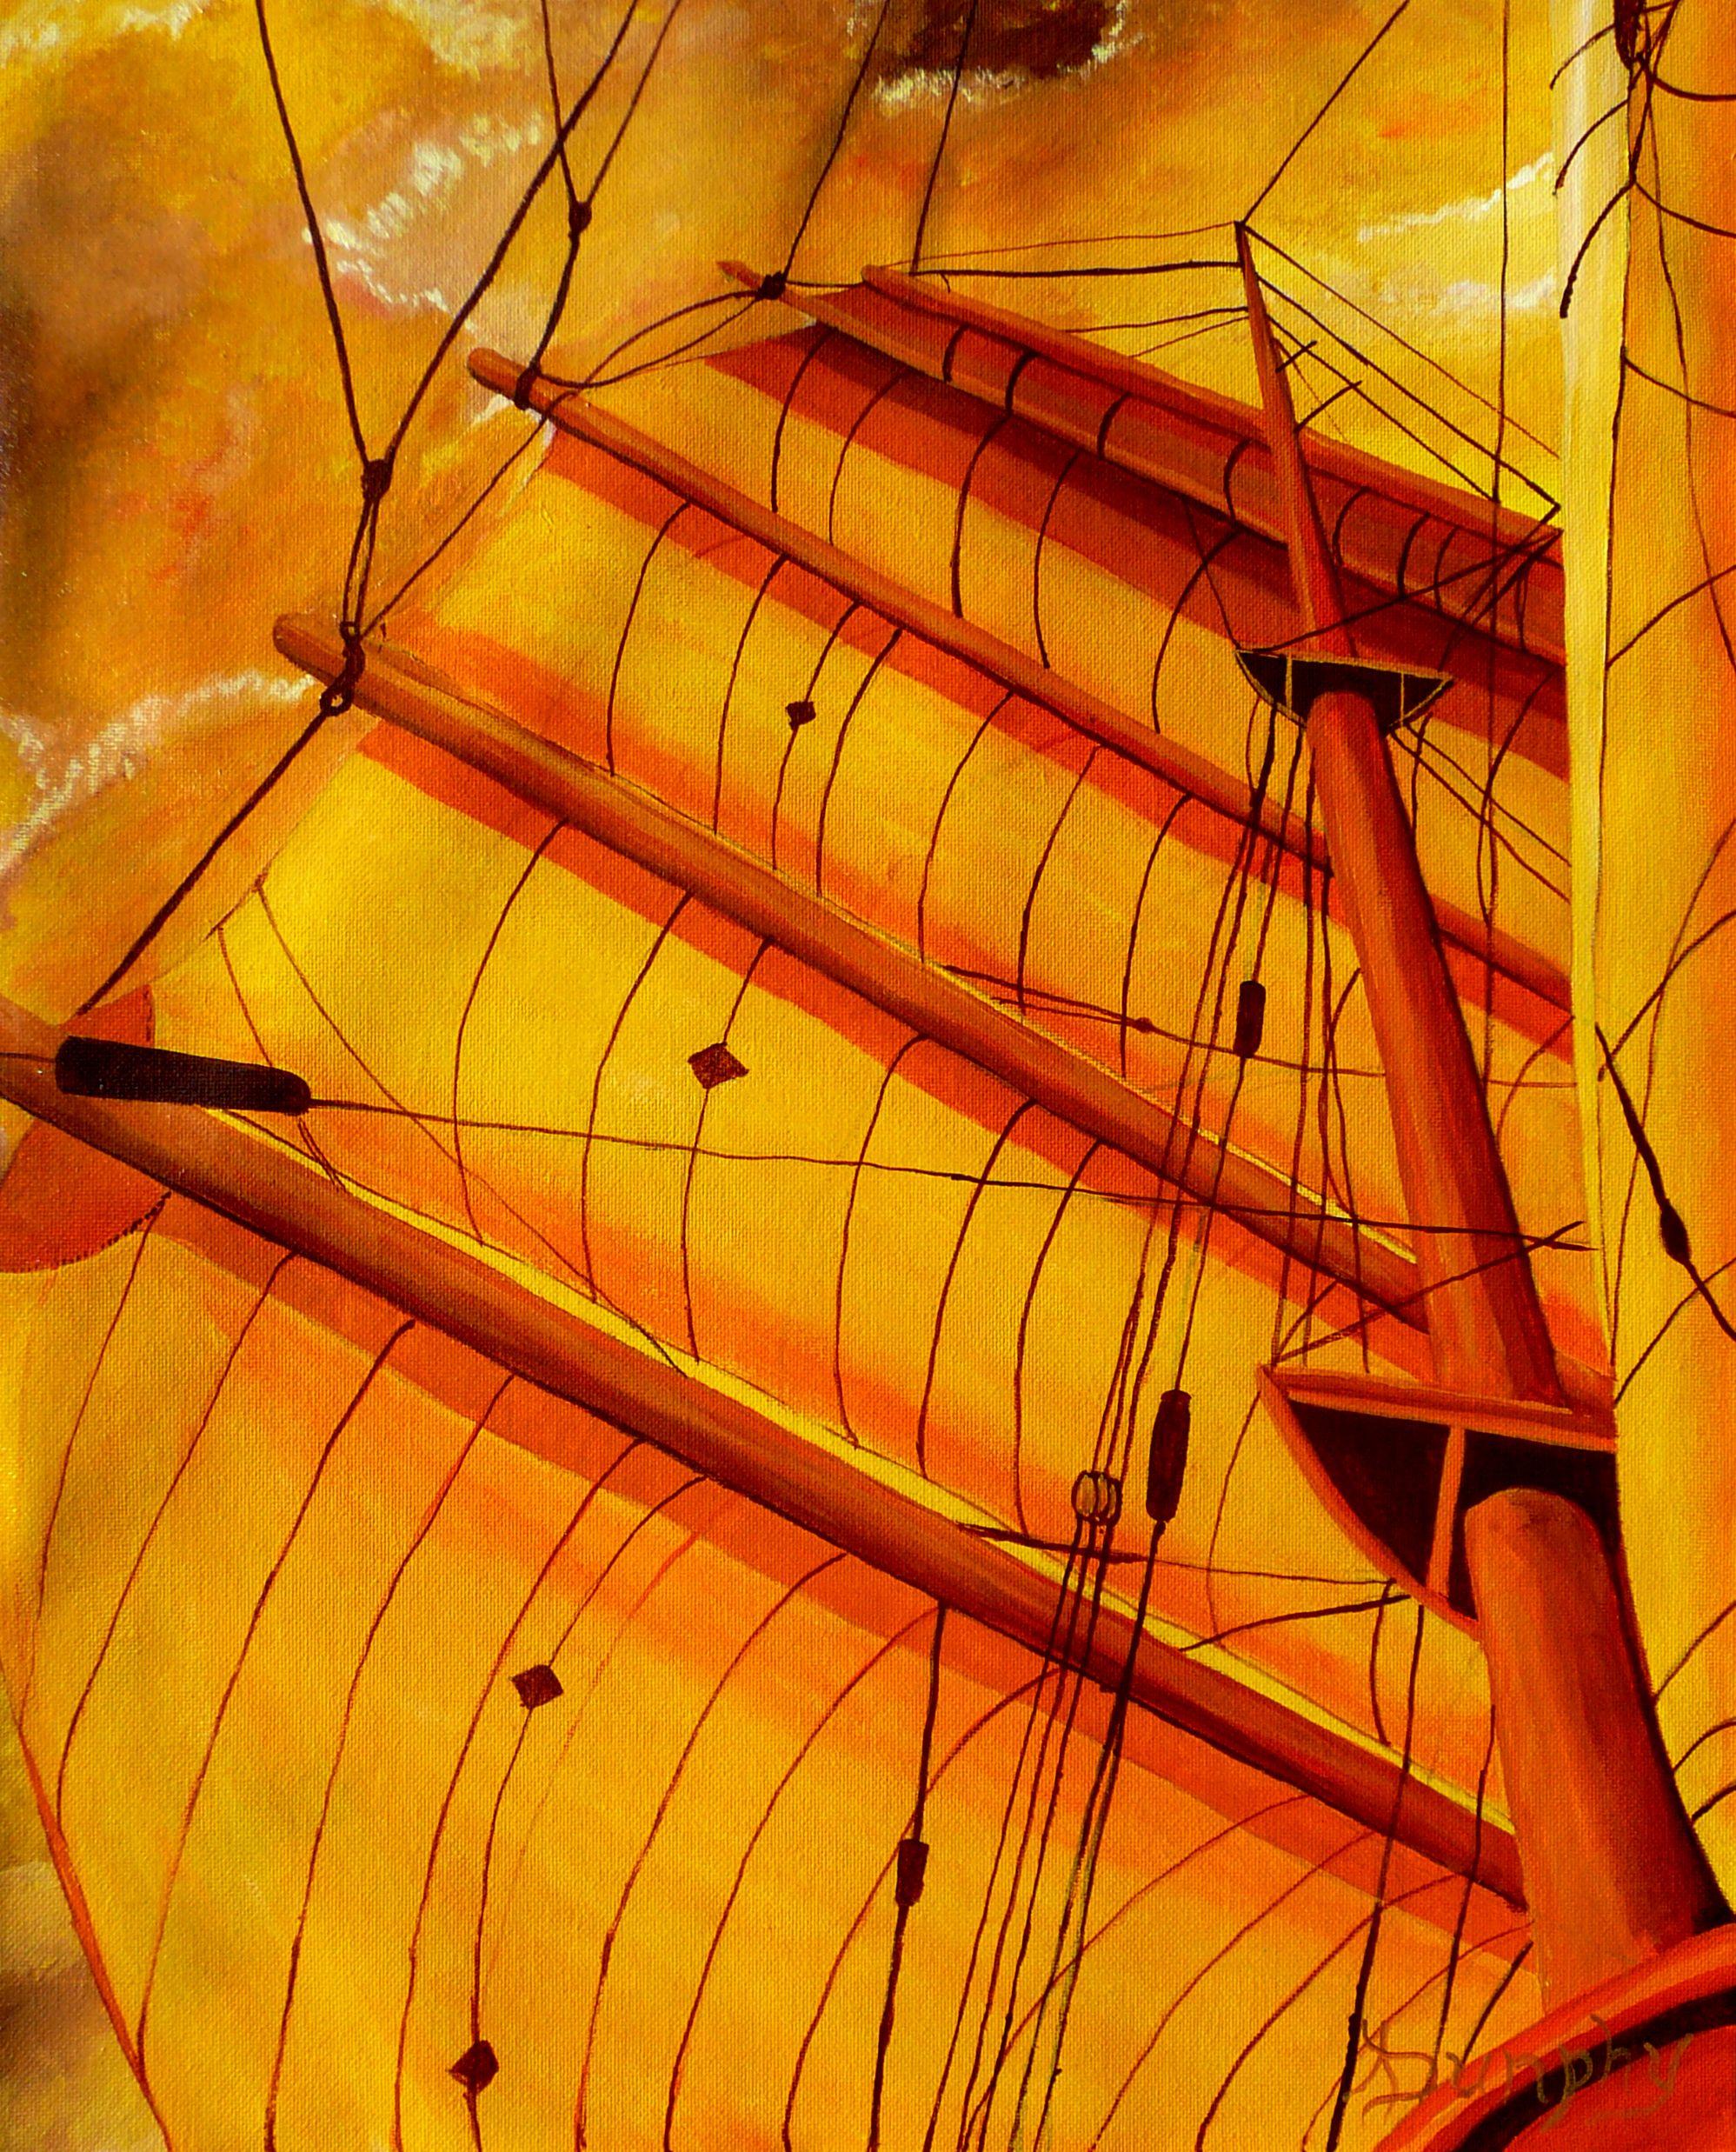 Under a glowing morning sky filled with dramatic golden clouds a ship passes by while the sails are painted with the gold of the sunrise.  This painting has been created using professional grade acrylics on canvas. It has been coated with clear